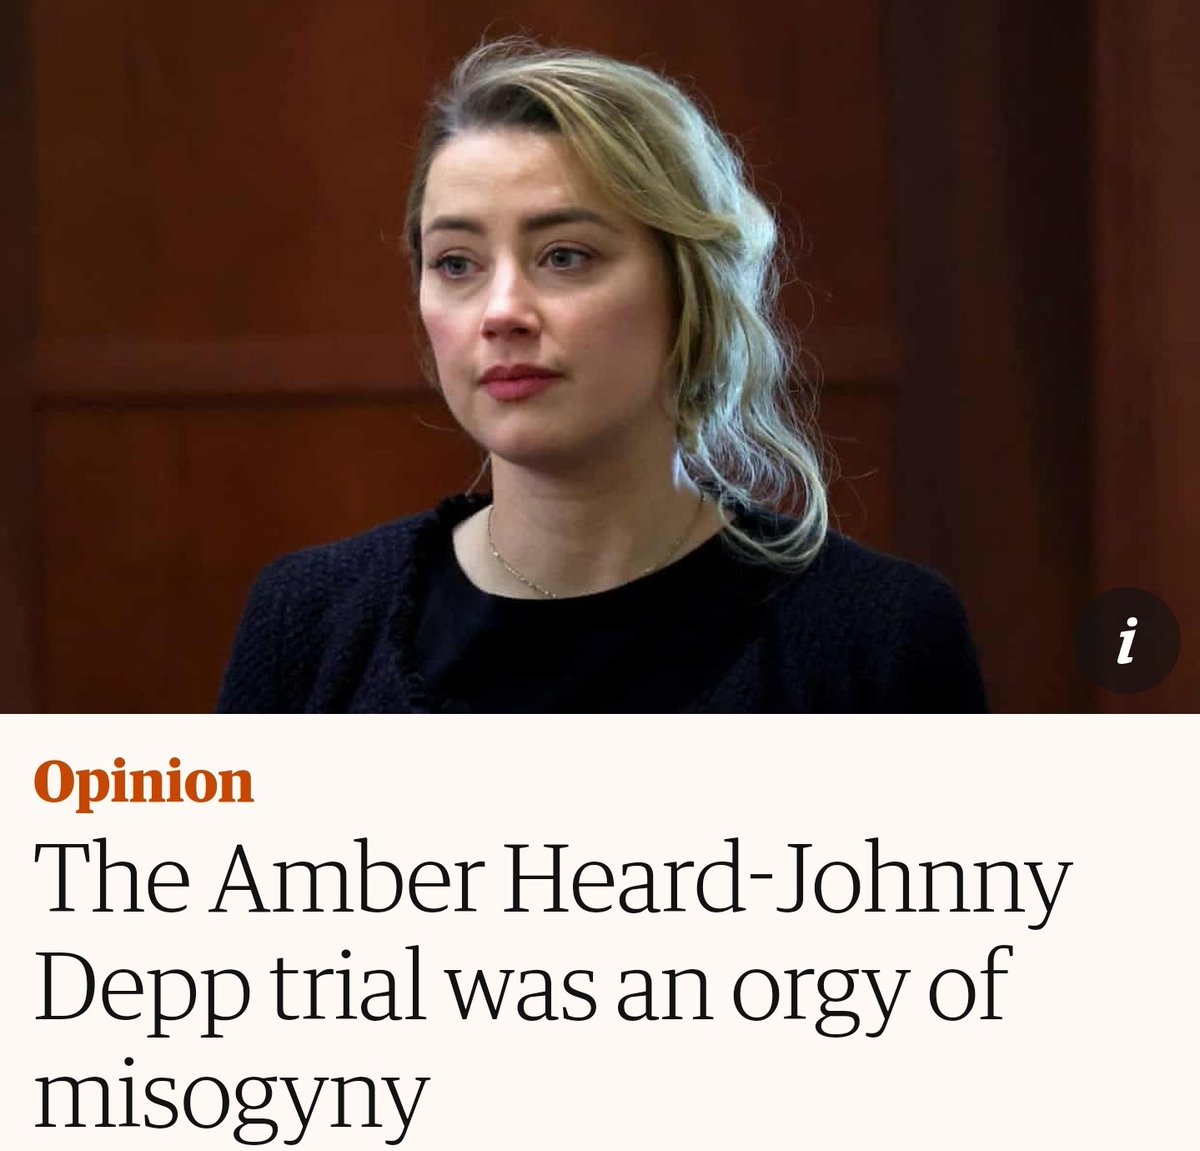 With #DeppVHeard a constant theme is vilification of outrage against Amber. One publication went to describe it as 'Orgy of misogyny'

Yet no one questions, why there was so much 'outrage'..

1) She never took an accountability for anything despite so much evidence against her…